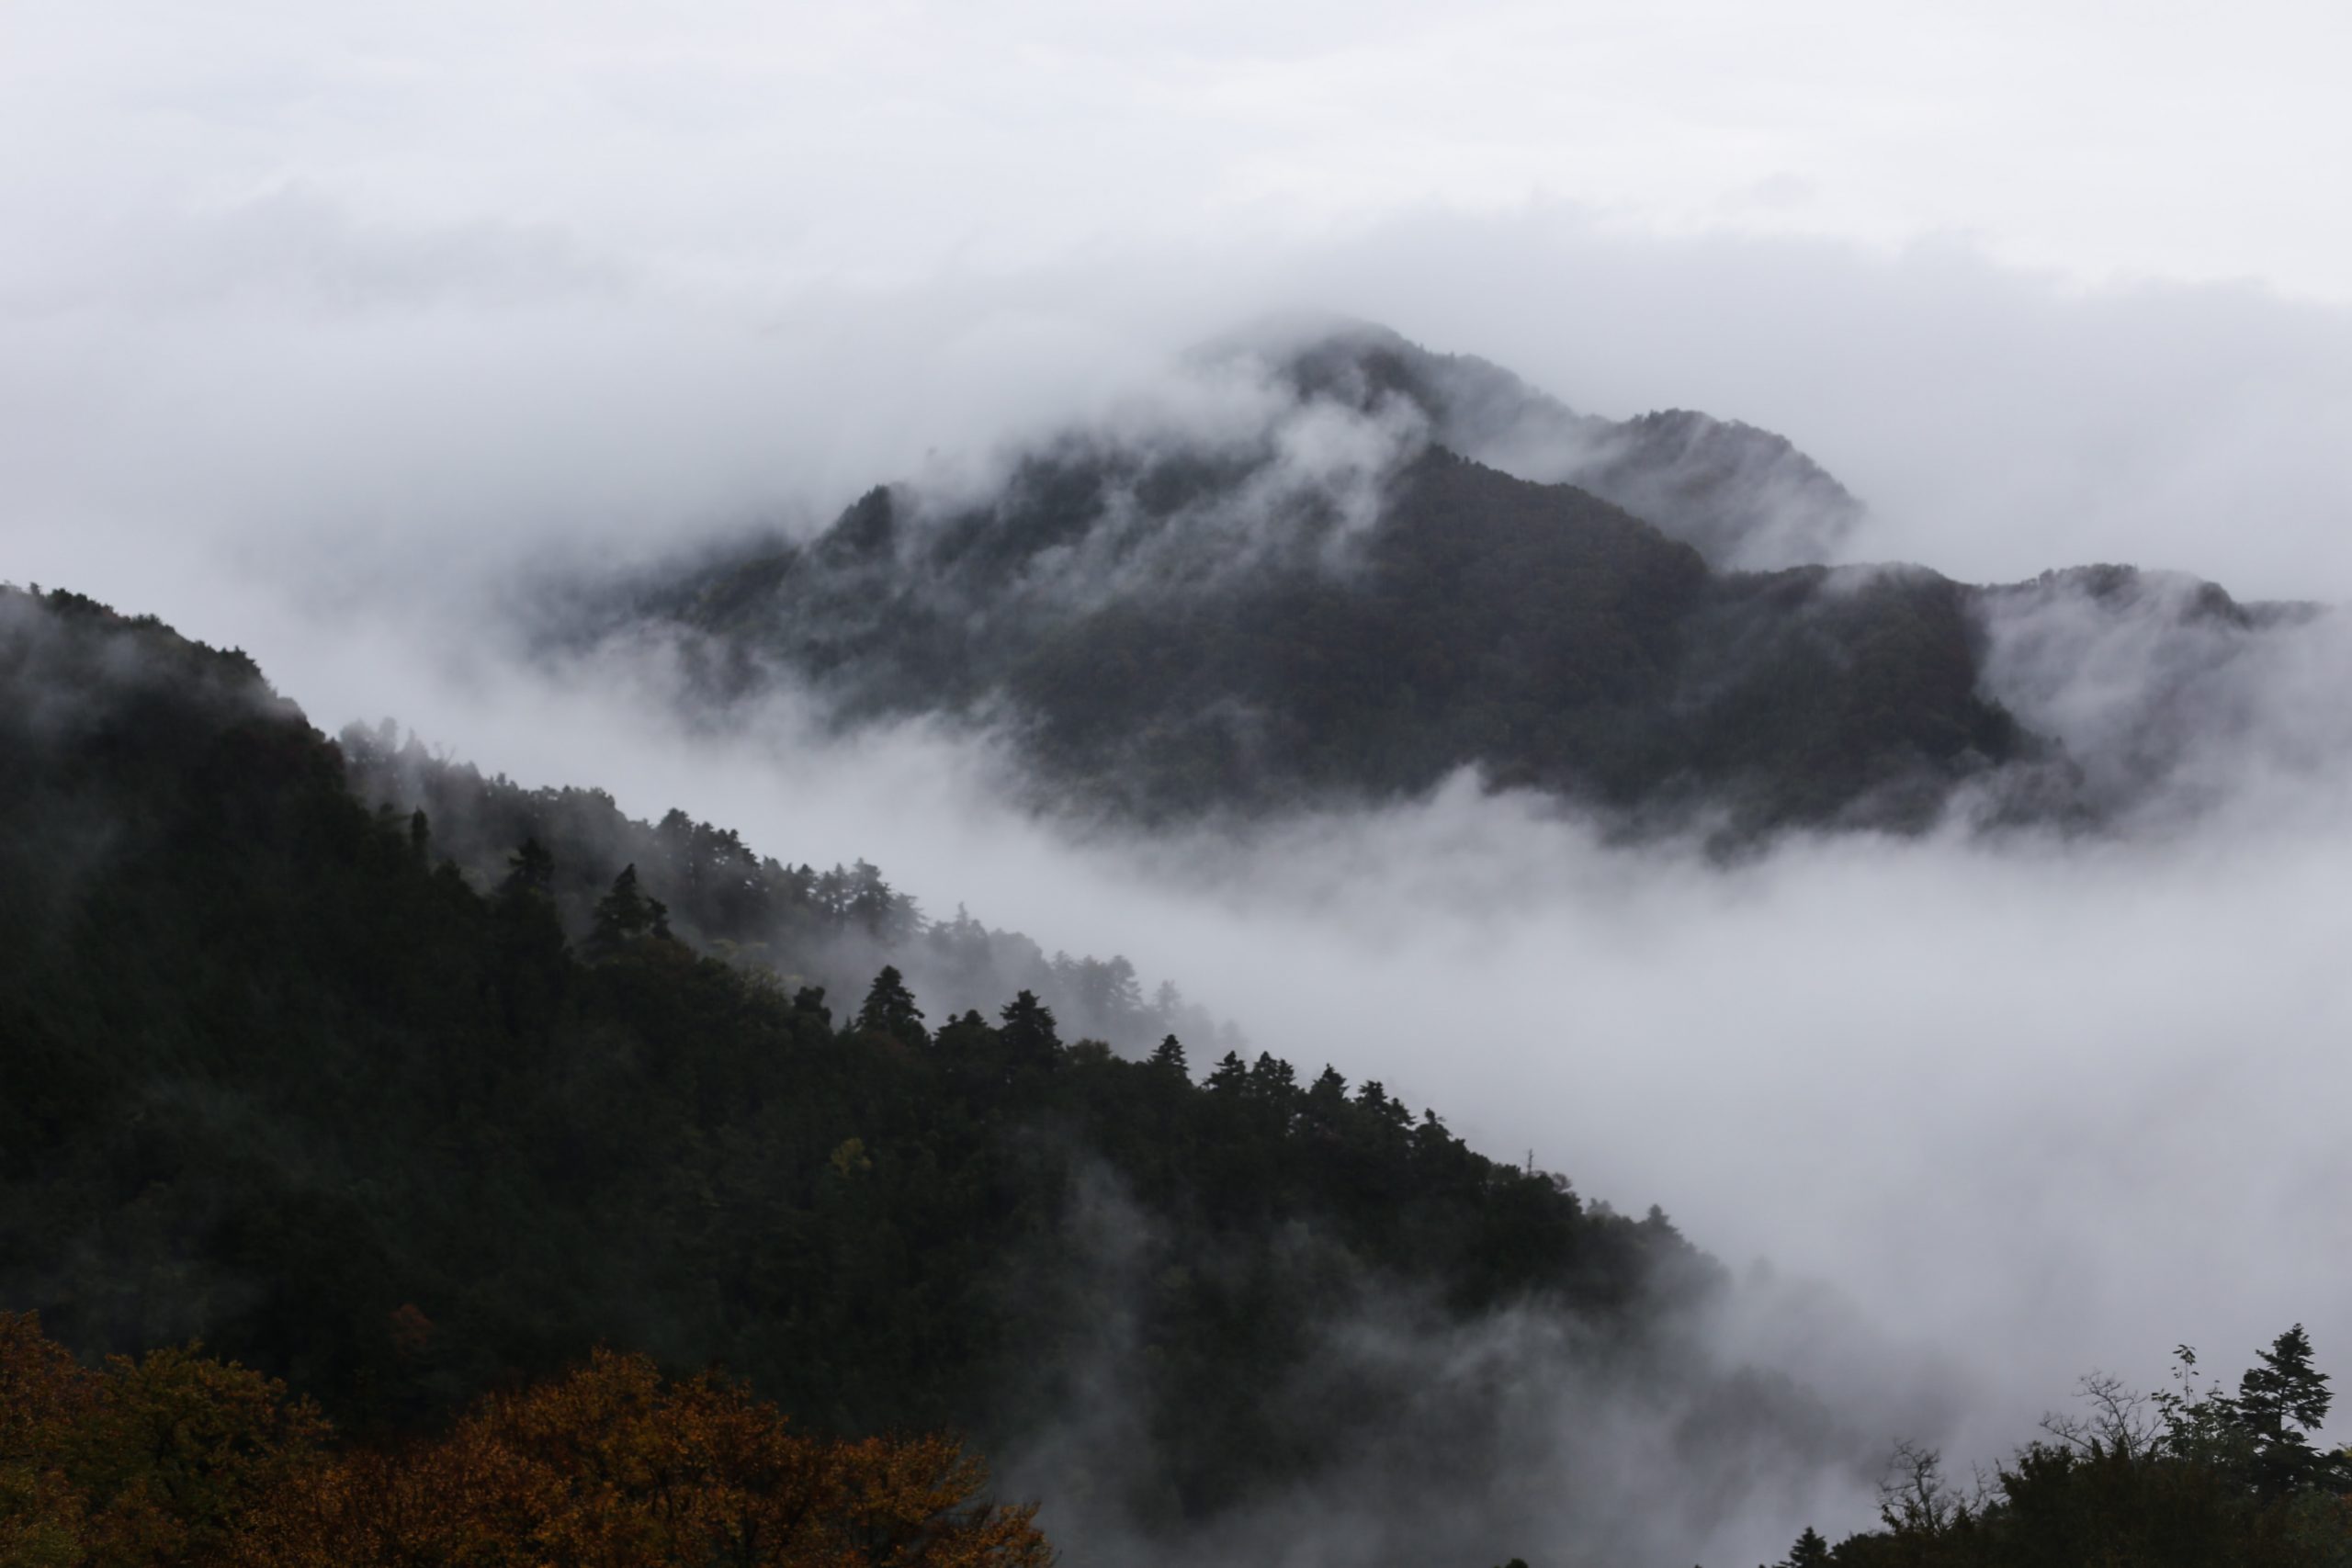 Mount Takao in Japan